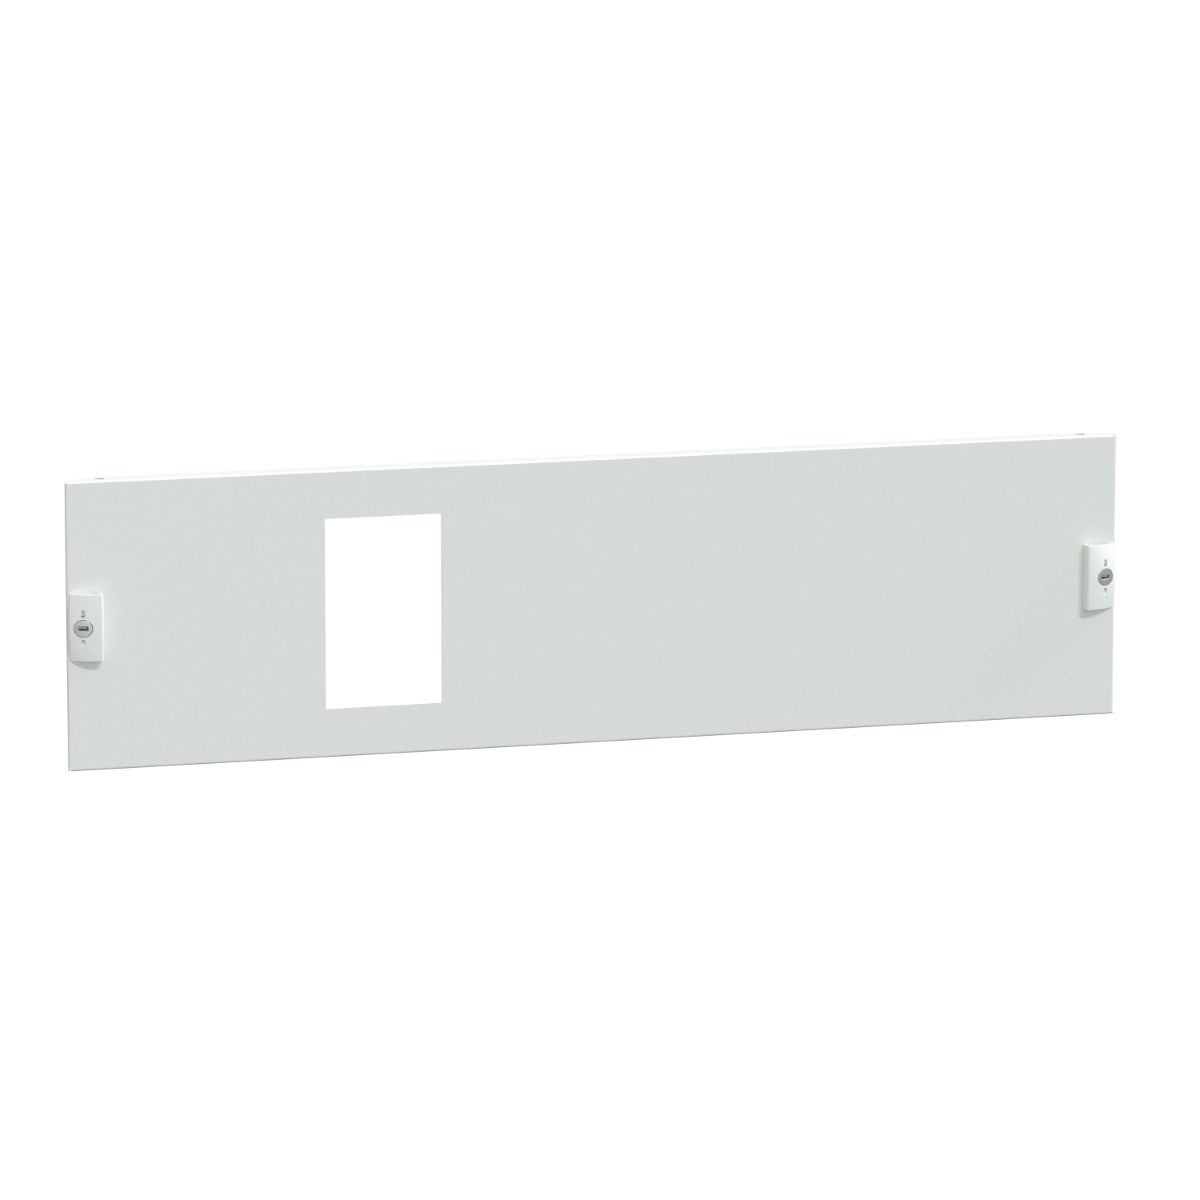 FRONT PLATE INS250 HORIZONTAL W850 4M